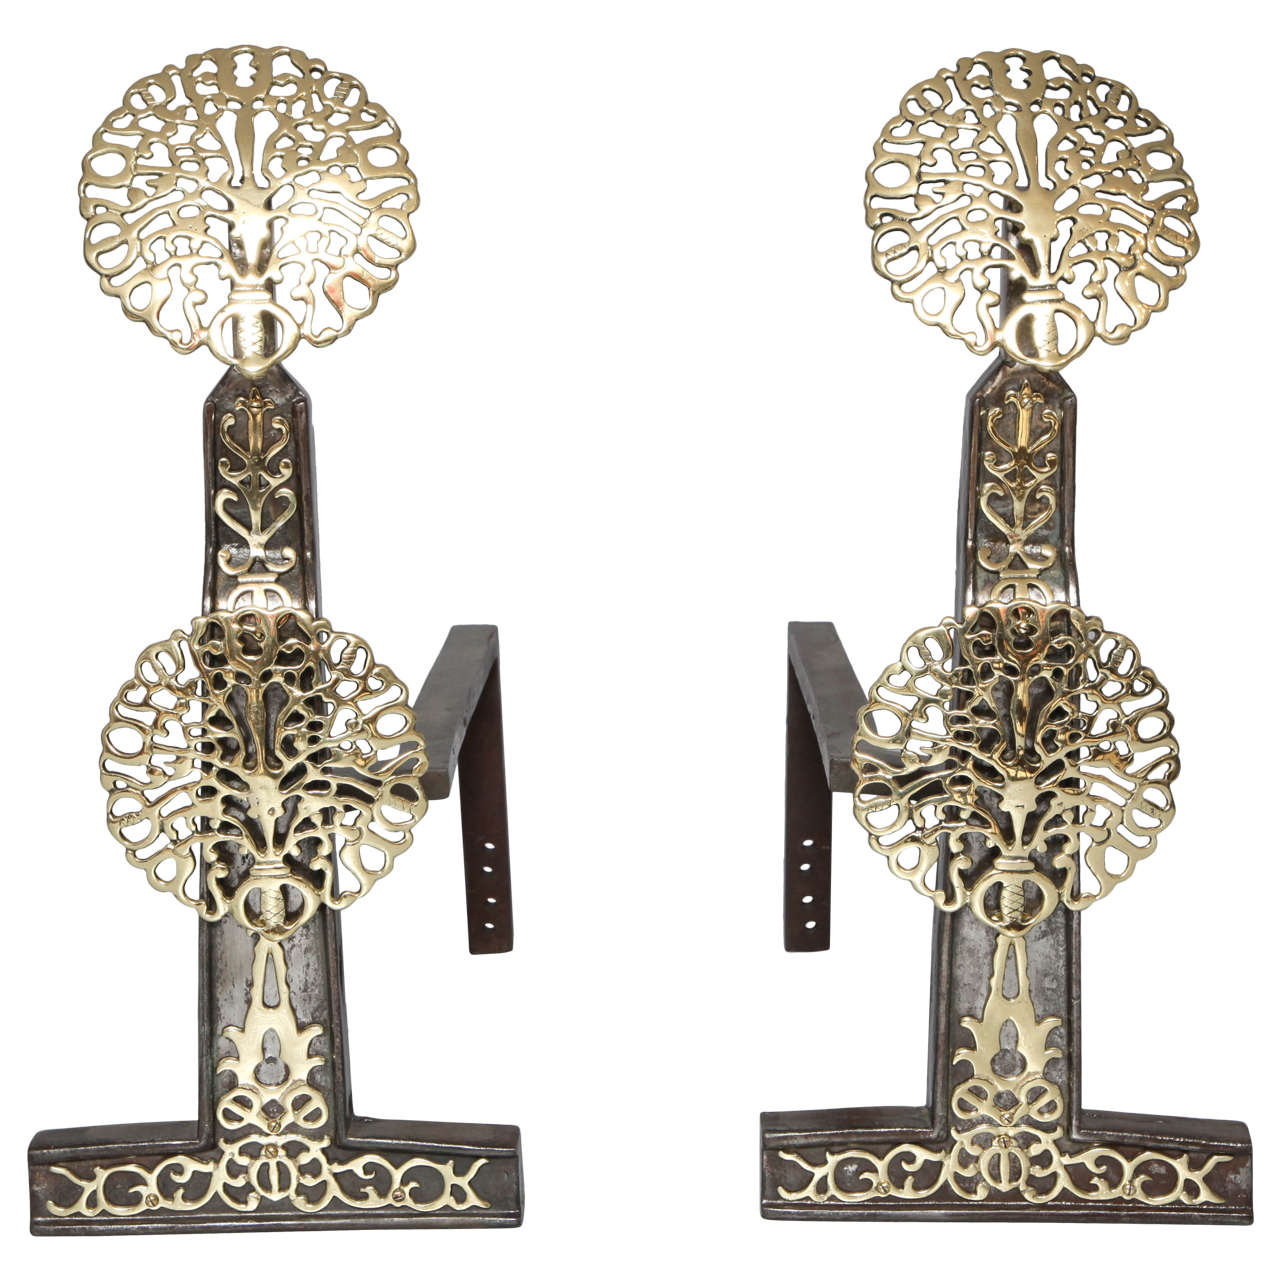 Exceptional Pair of Andirons For Sale